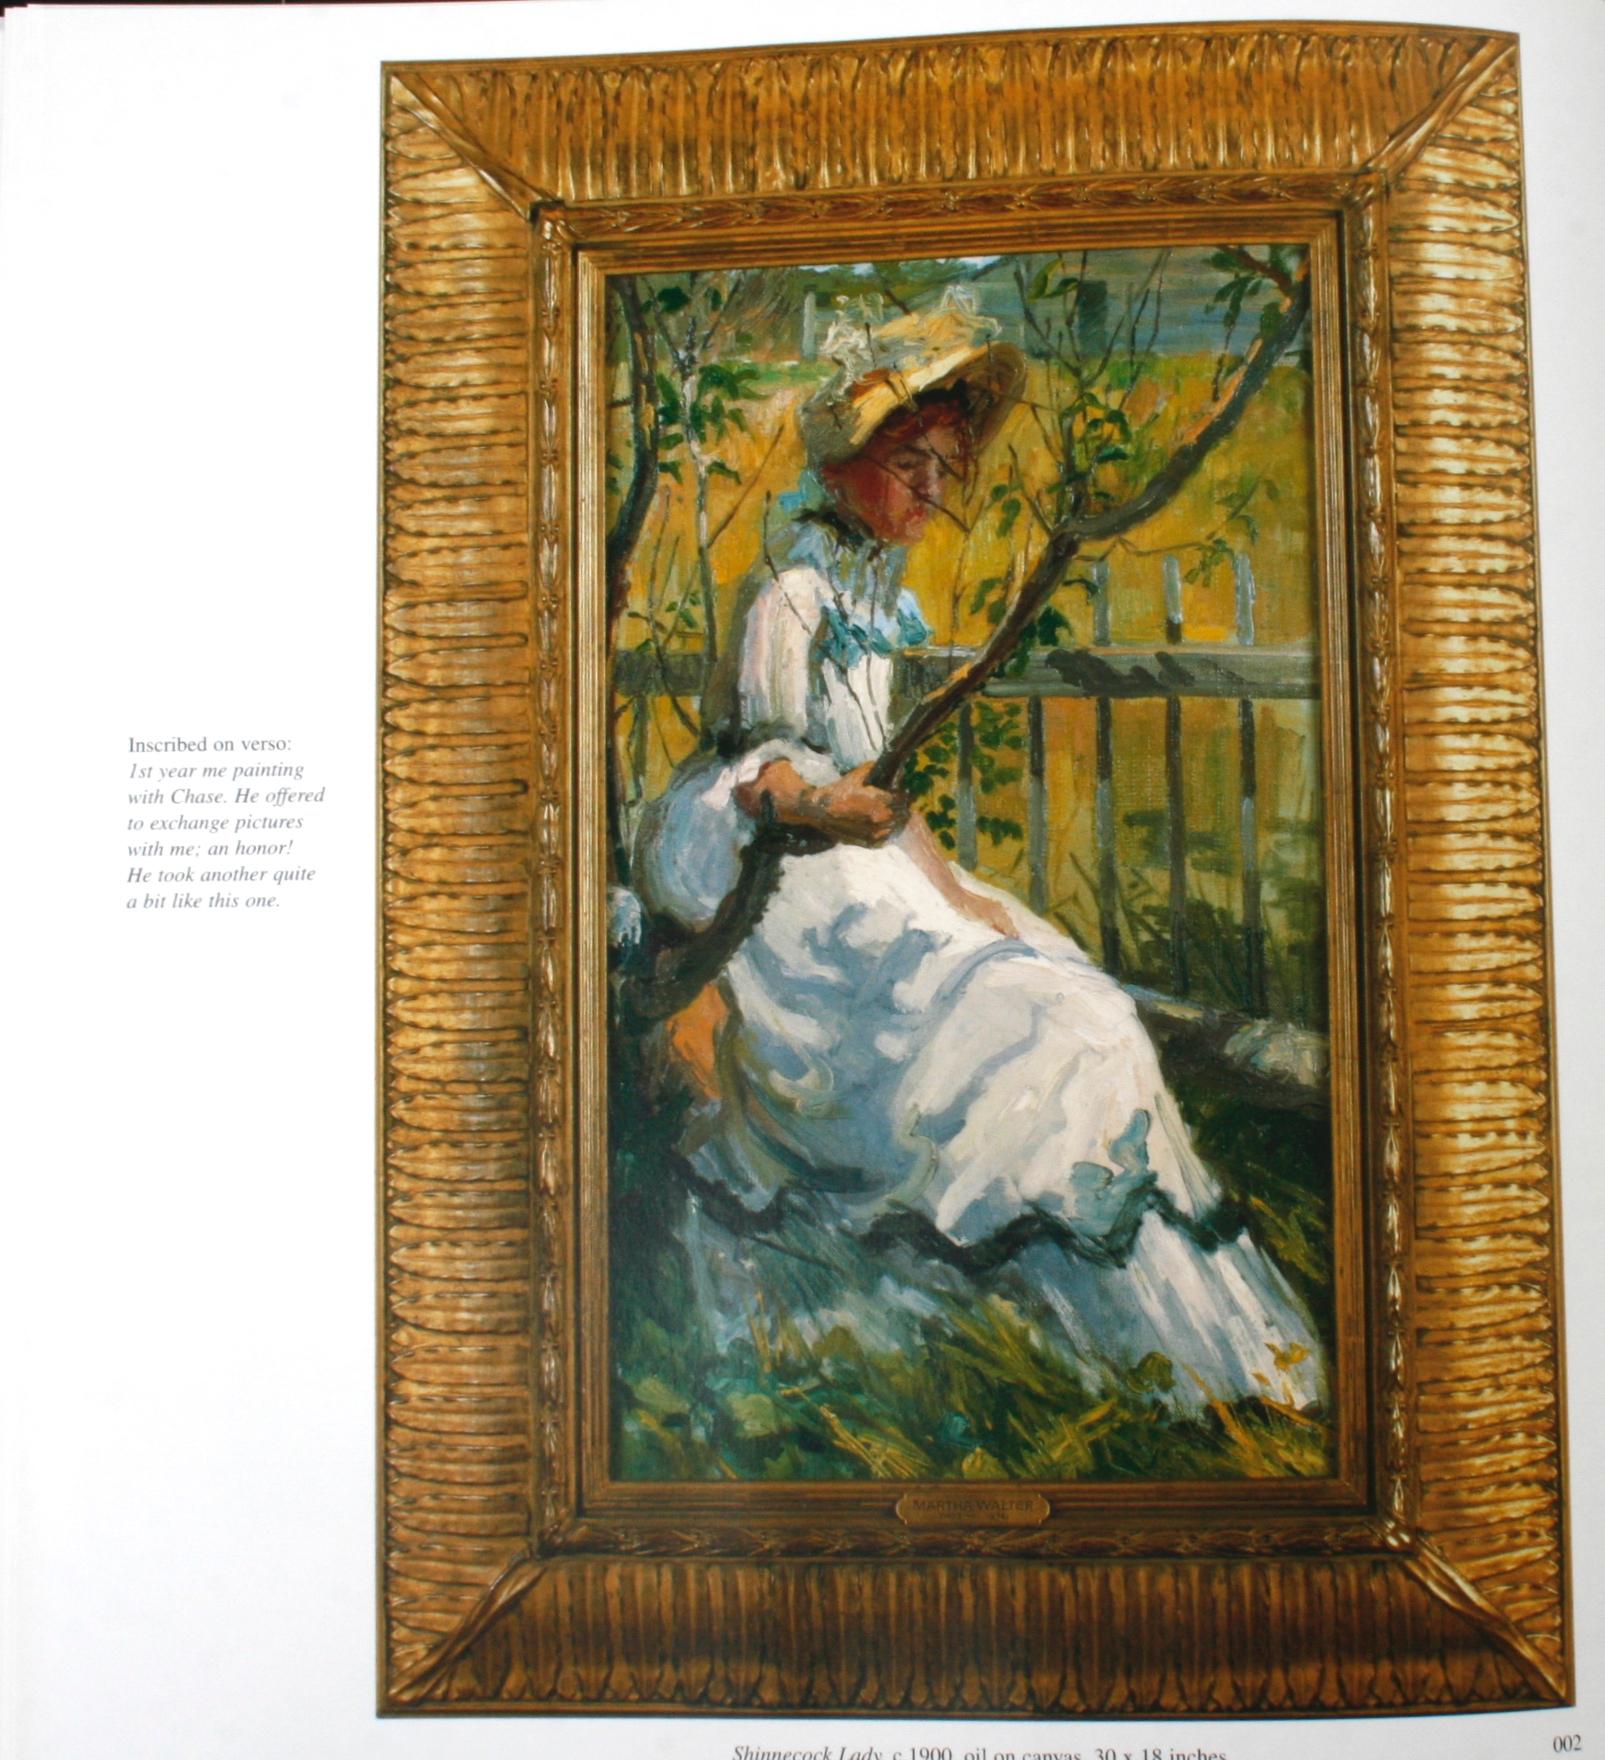 Impressionist jewels, the paintings of Martha Walter, Philadelphia: Woodmere Art Museum, 2002. First limited edition (#1/1500) hardcover with dust jacket. 180 pp. A beautiful art book on the paintings of Martha Walter published by the Woodmere Art